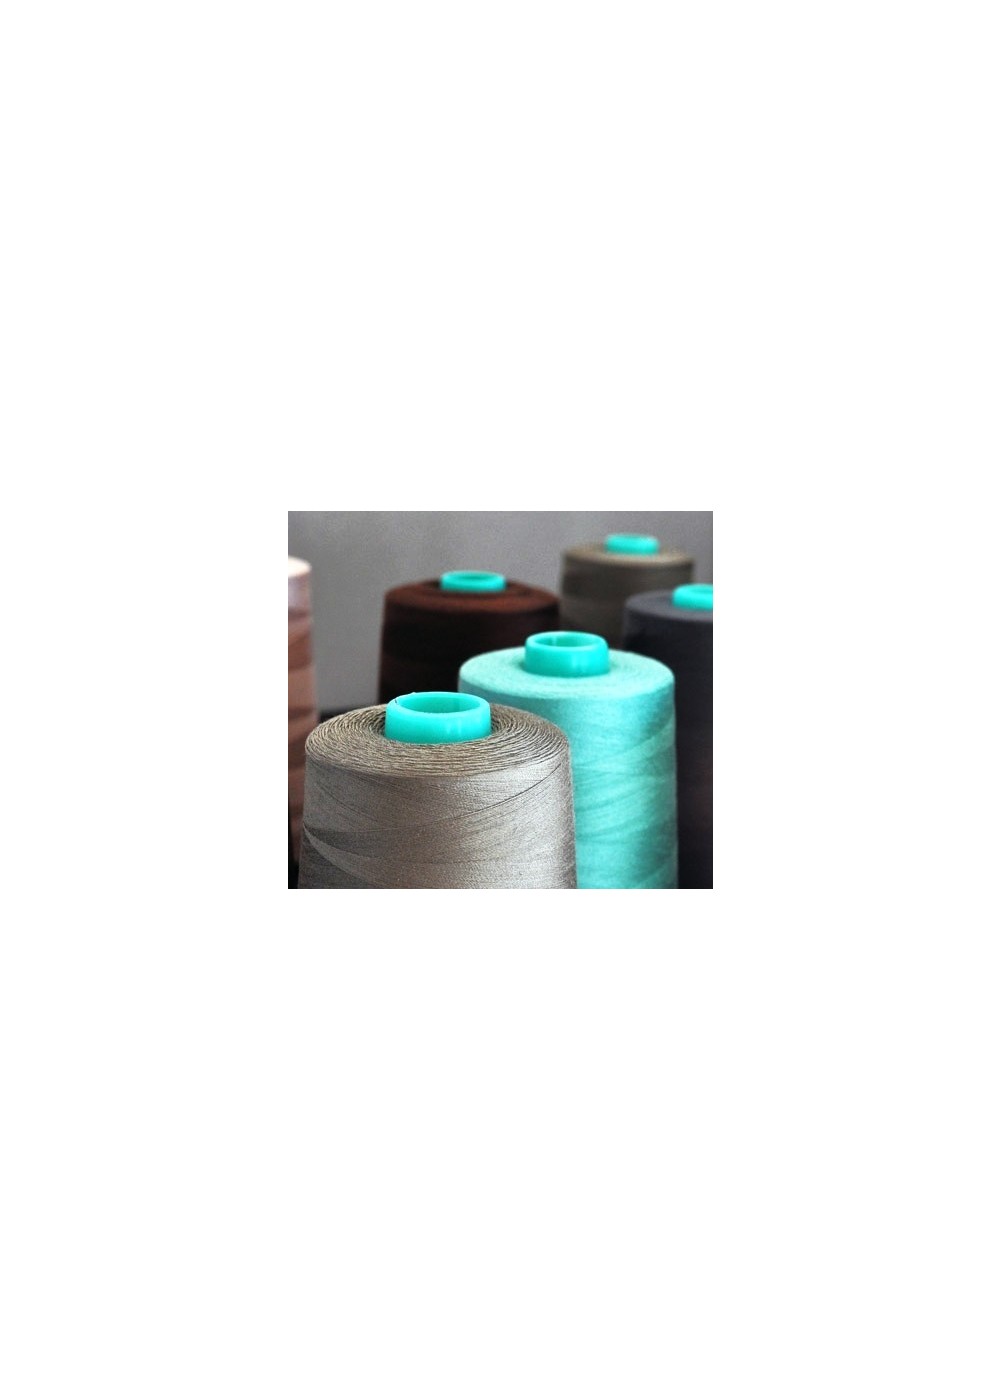 POLYSTER SEWING THREAD